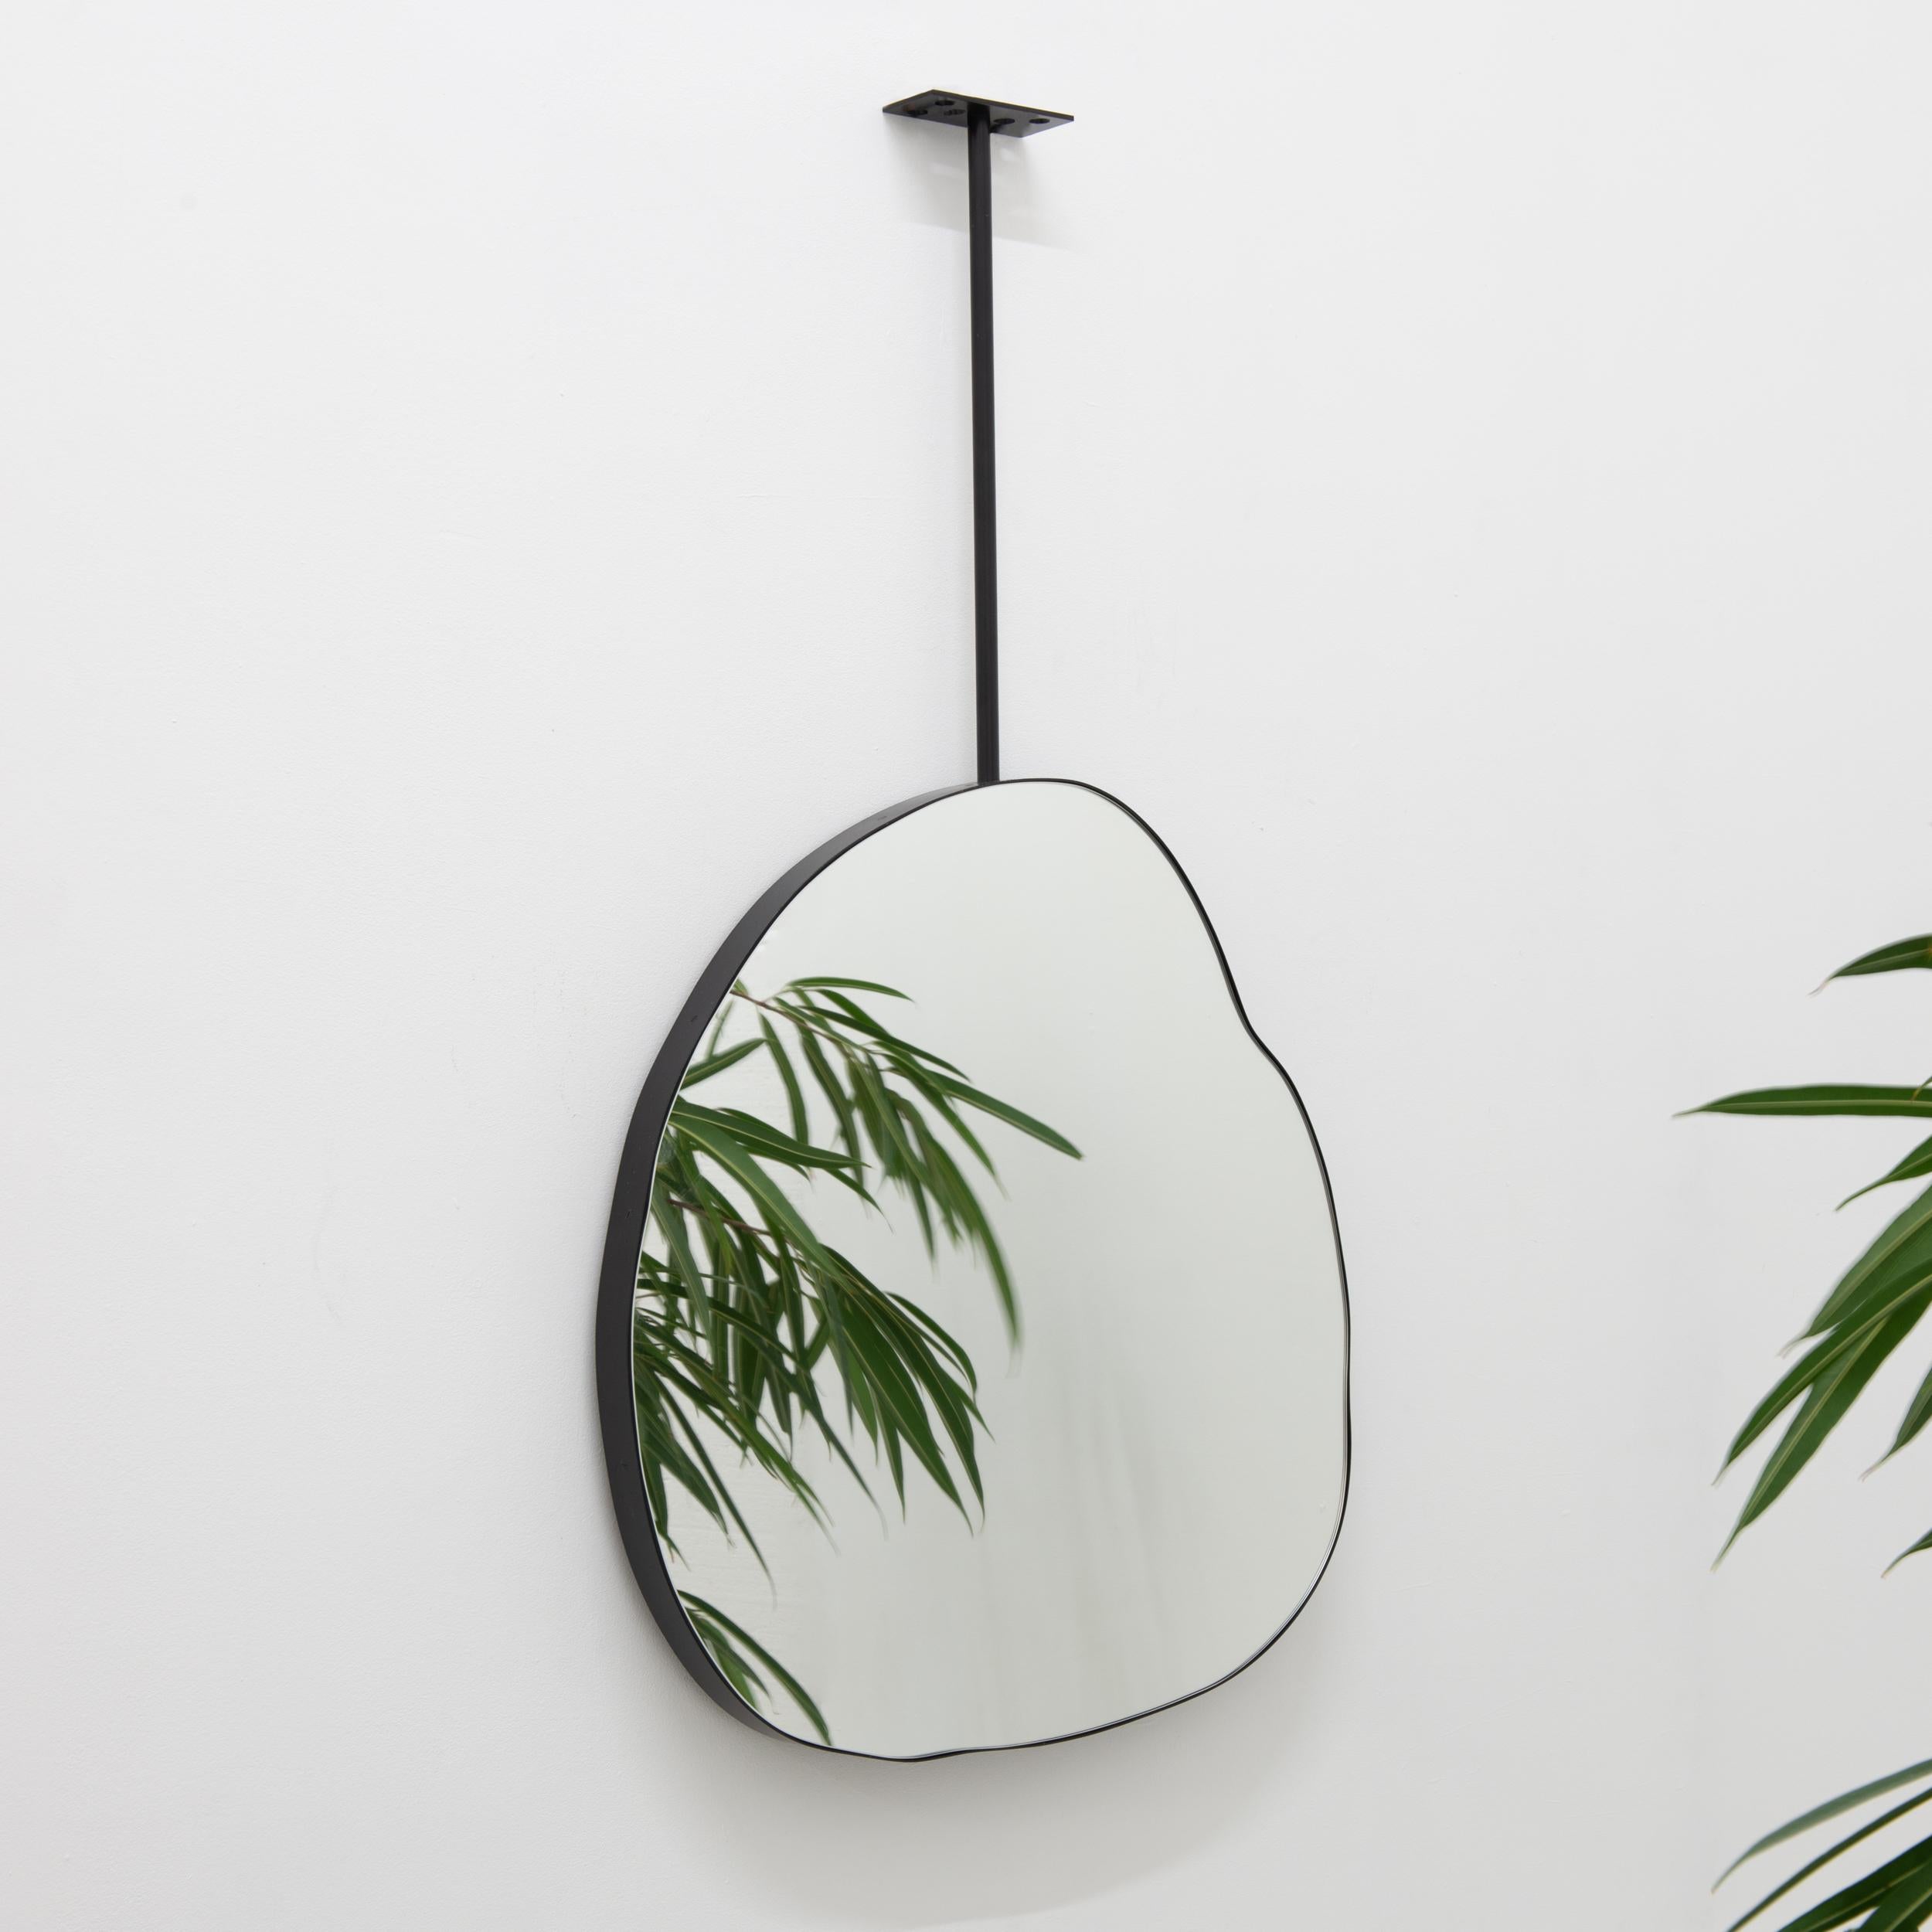 Original and unique organic shaped Ergon™ suspended mirror with a modern matte black frame.

Designed and handcrafted in London, UK, our unique and elegant collection of ceiling suspended mirrors is fully customisable to suit your specific